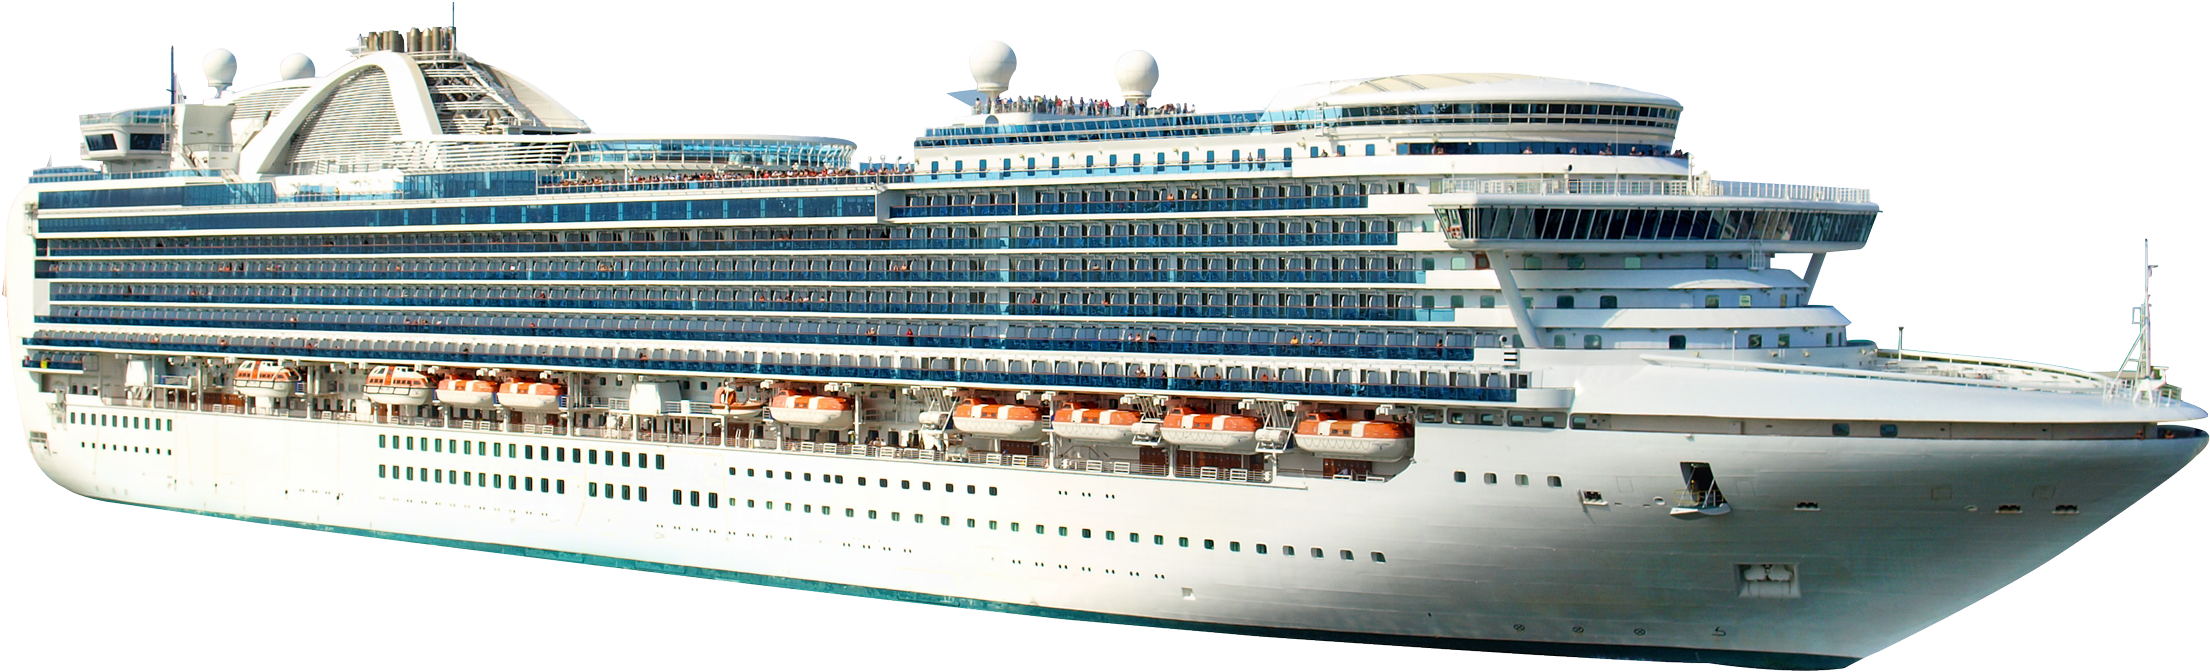 A Cruise Ship With Many Windows